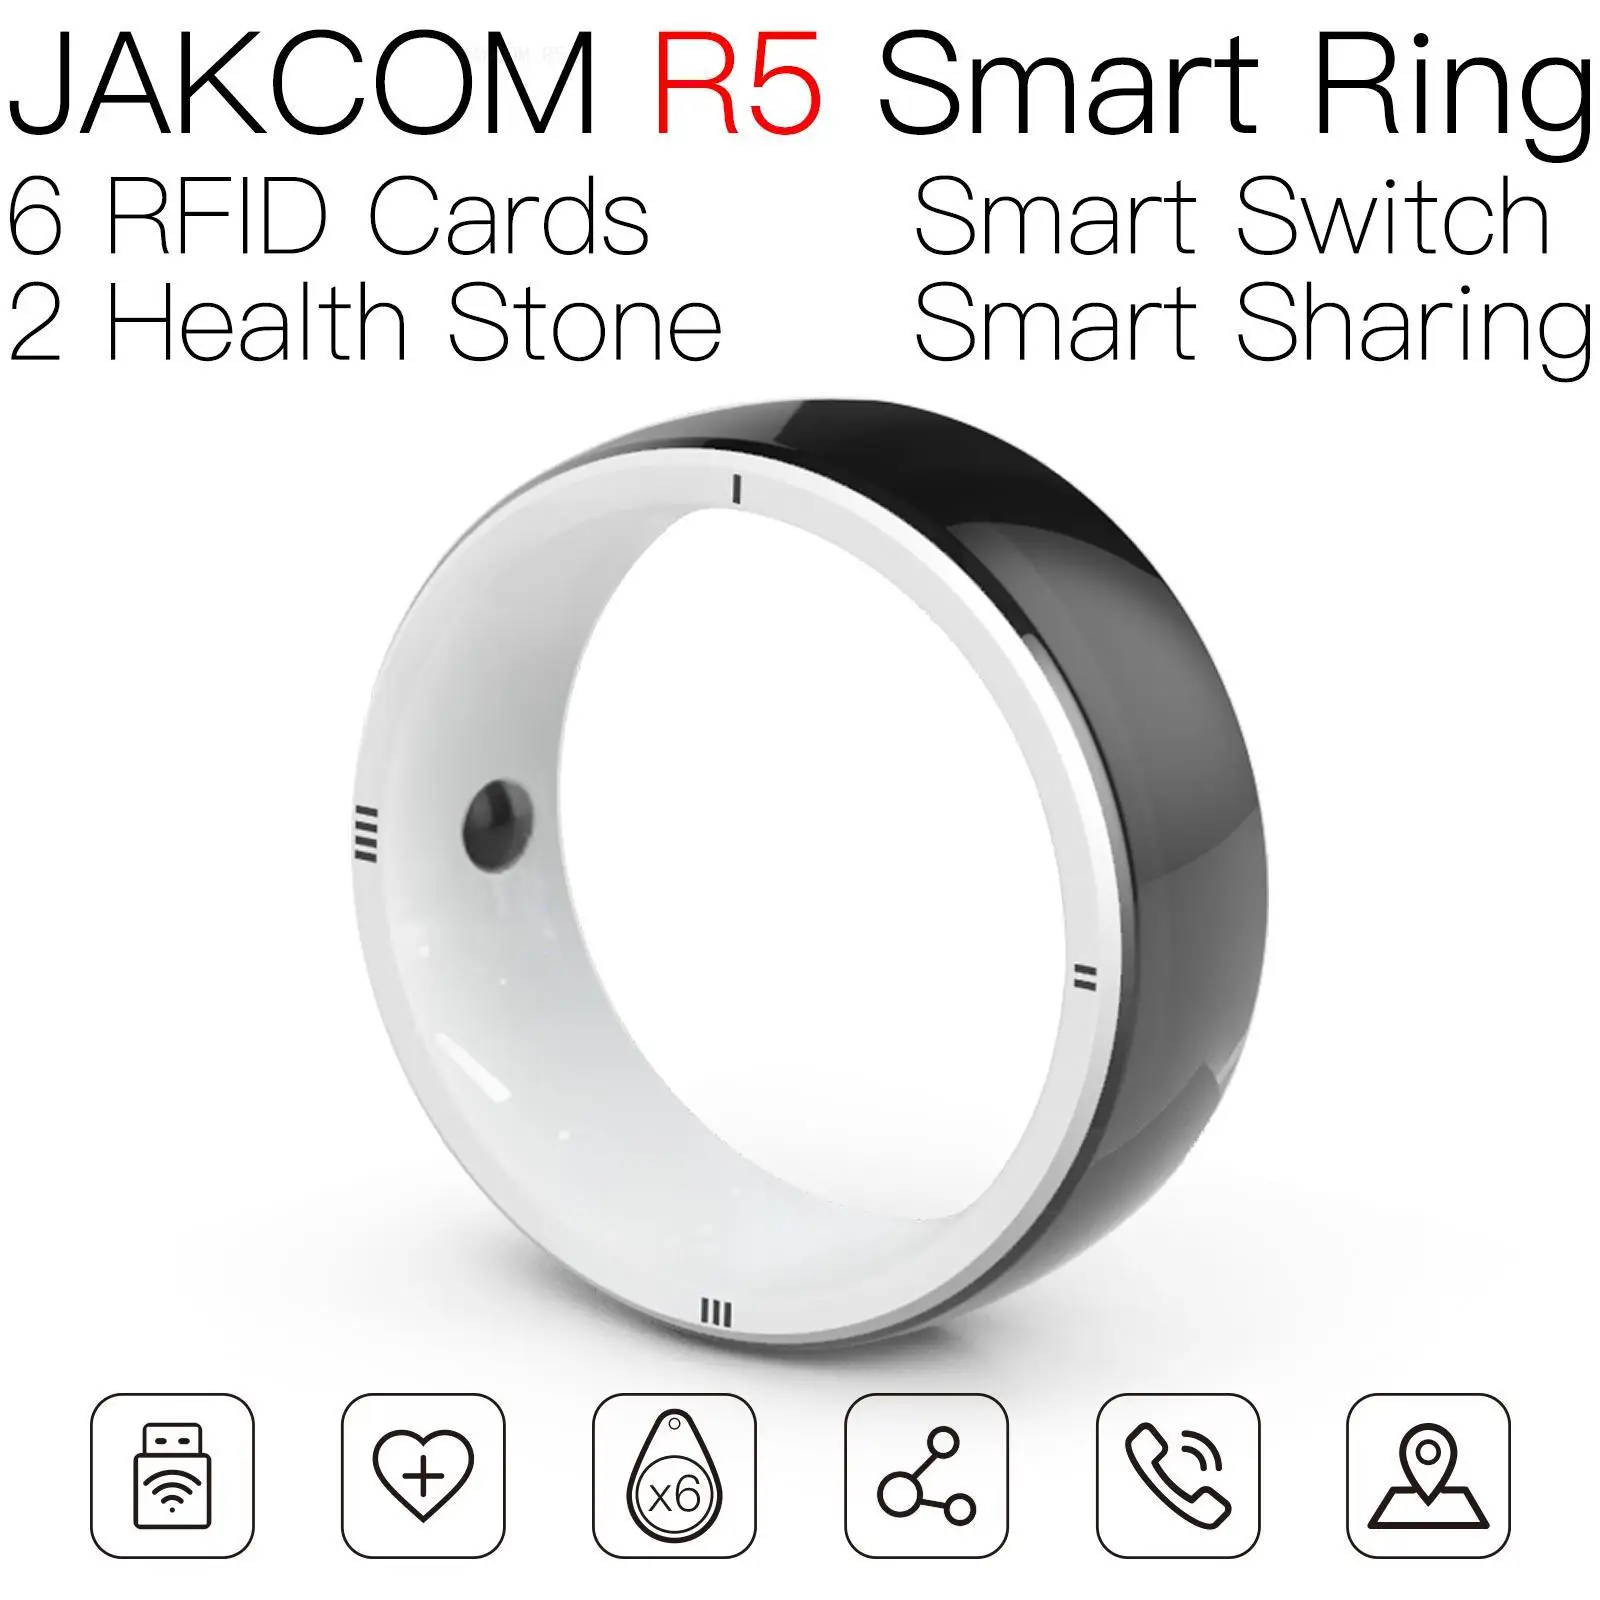 

JAKCOM R5 Smart Ring New product as mf s50 nfc temperature card tum page eletronic master key oumeige store watch emv chip